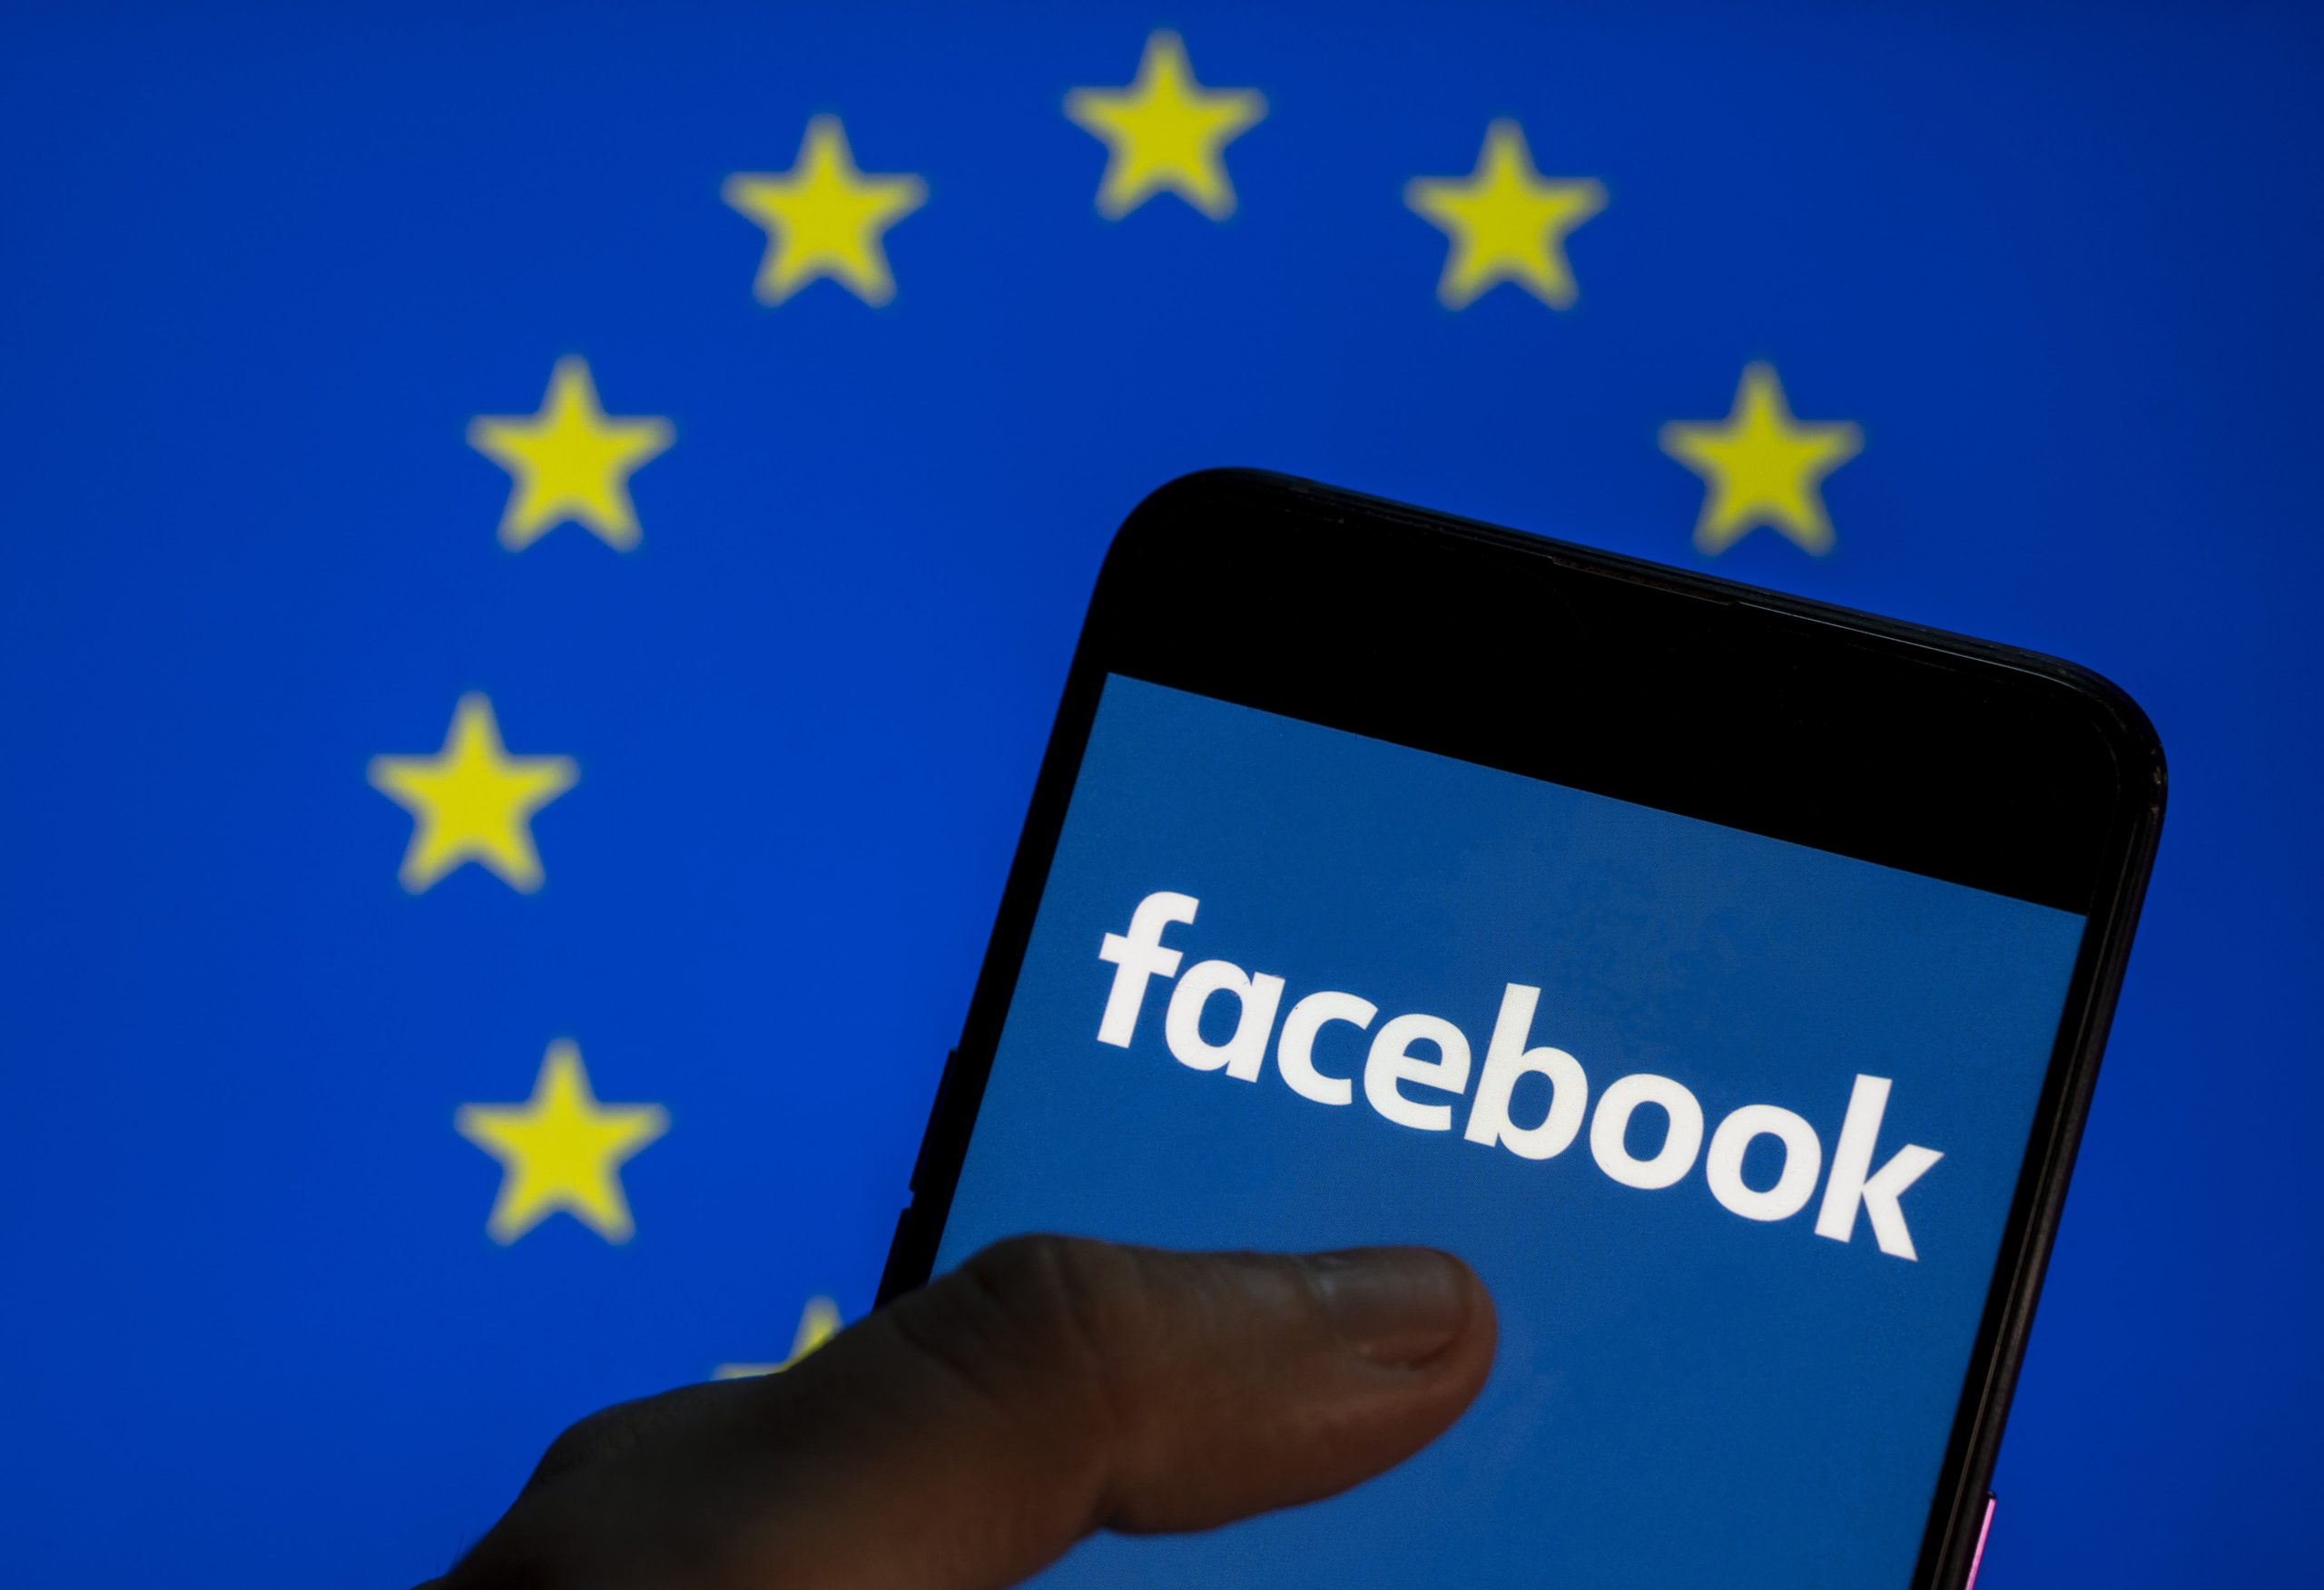 Facebook is creating 10,000 jobs in EU to help develop a metaverse